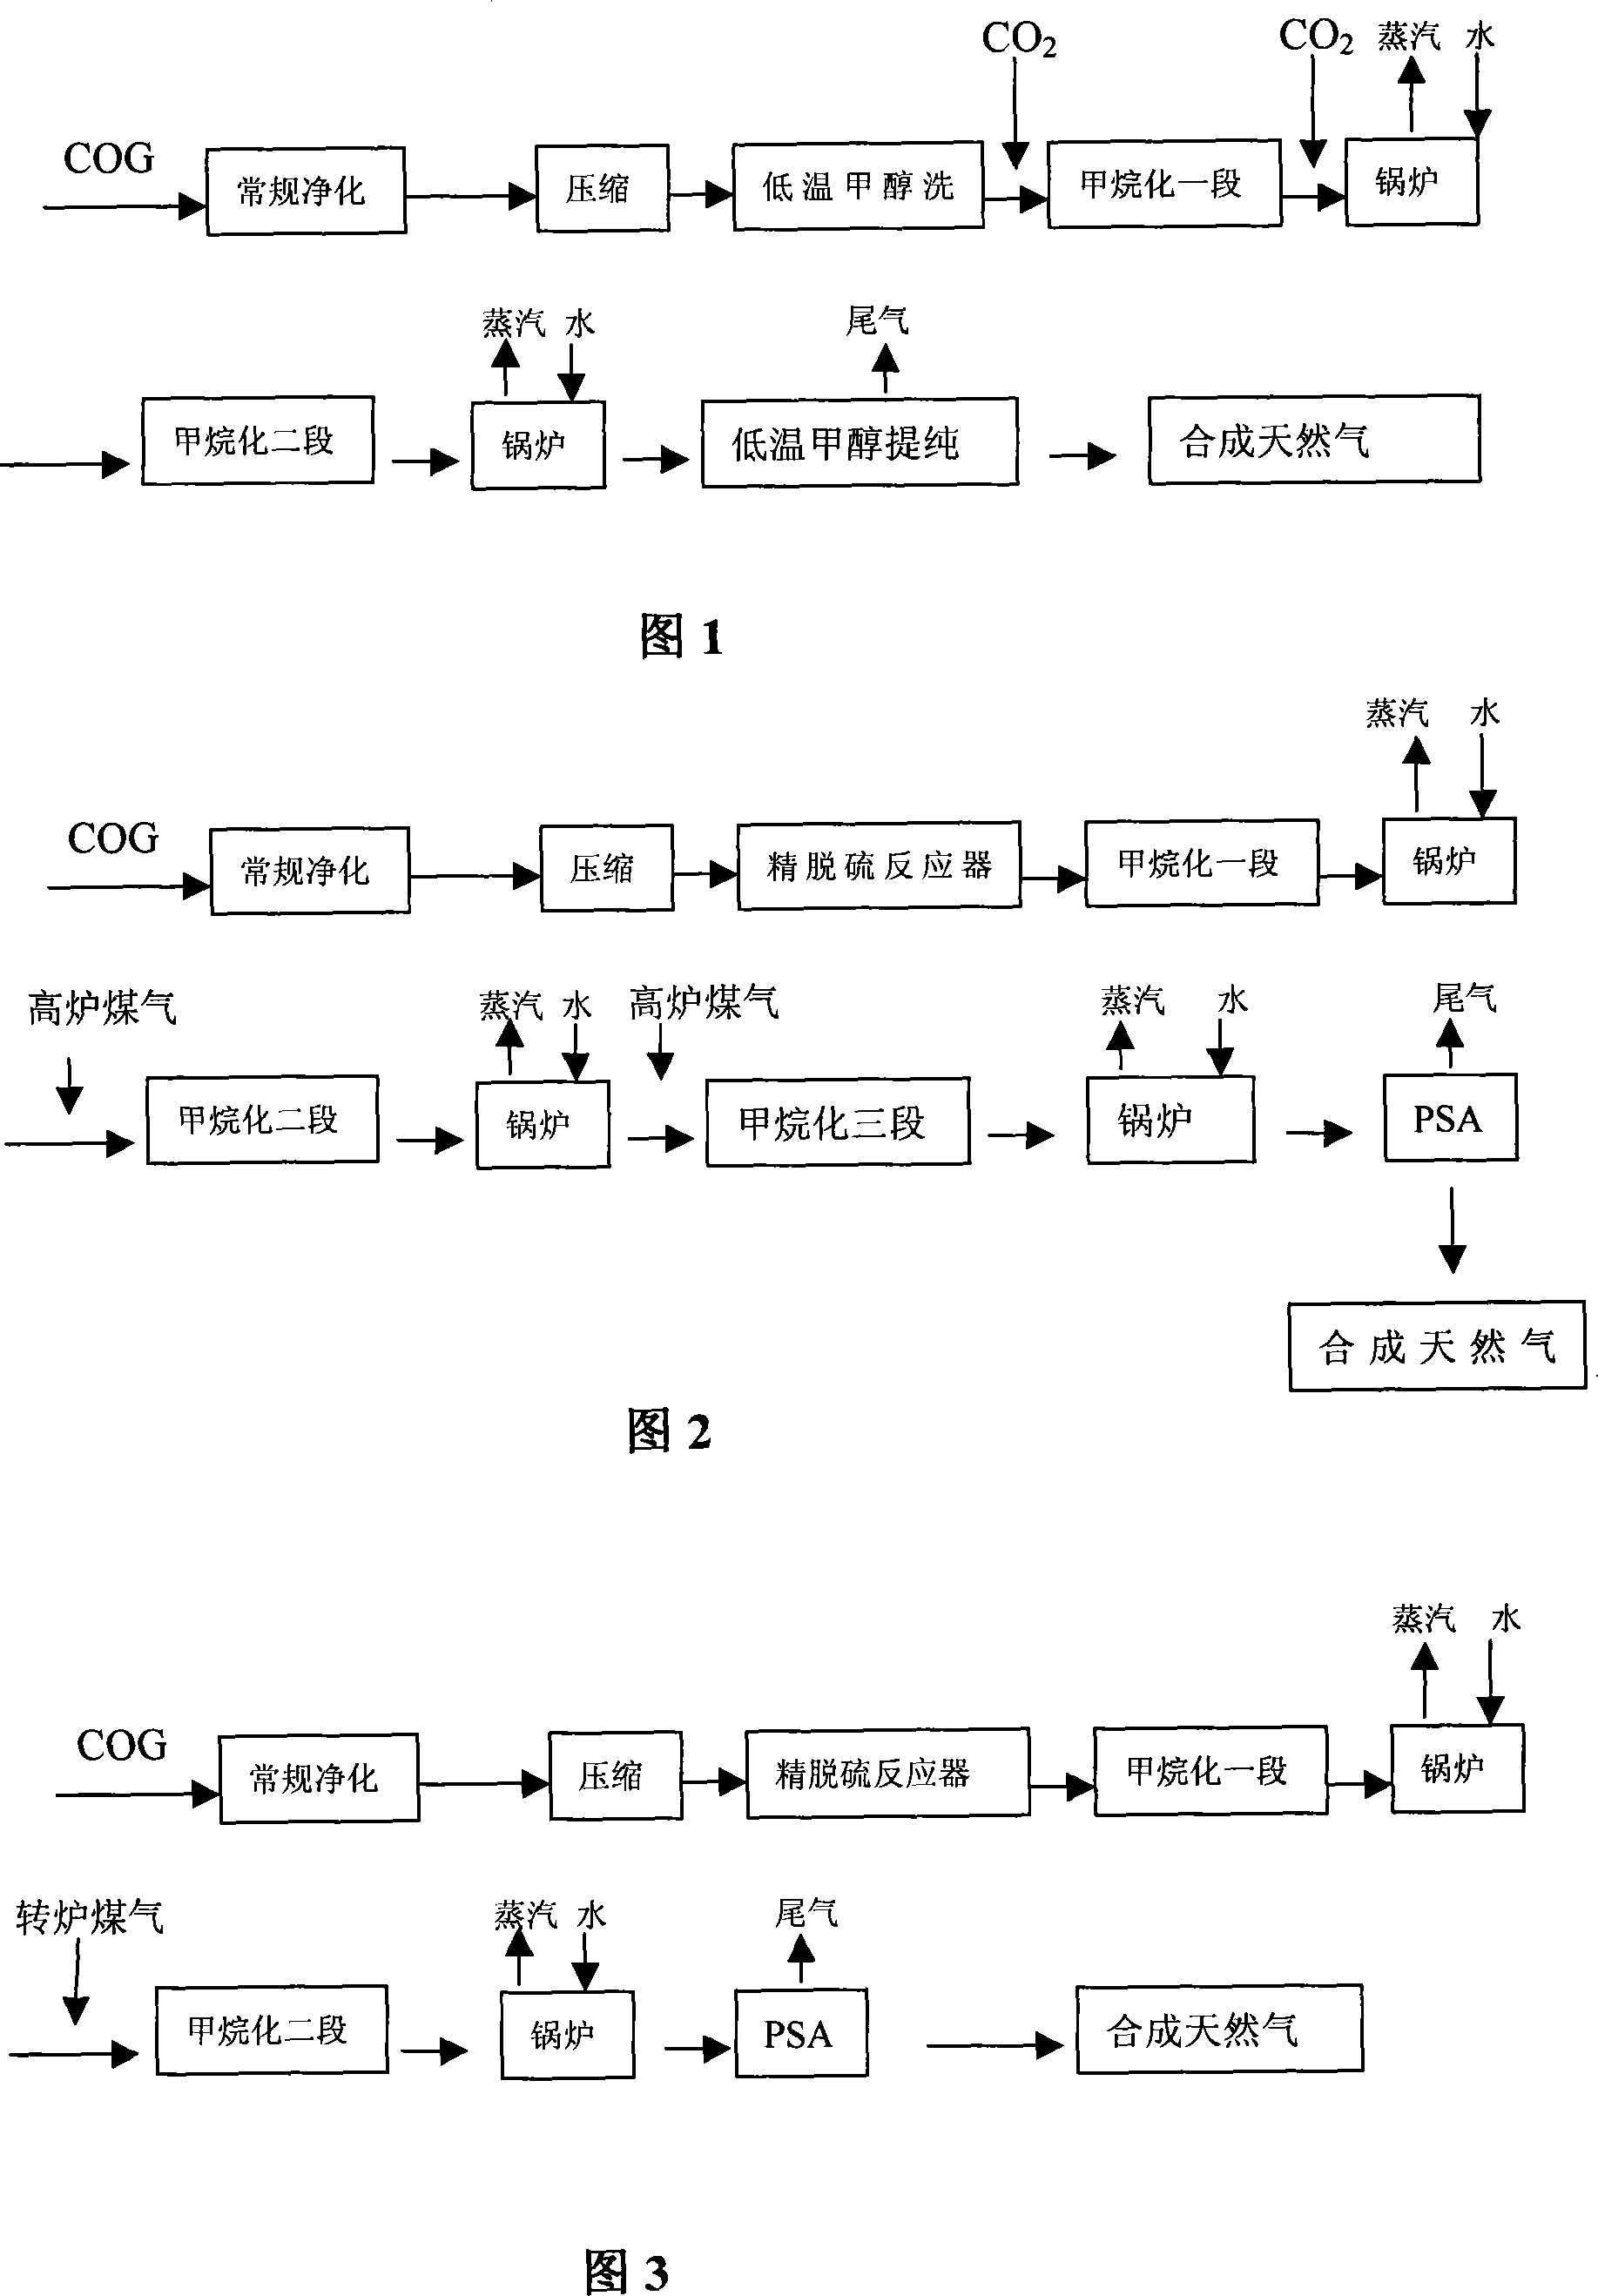 Method and device for synthesizing natural gas by using coke oven gas